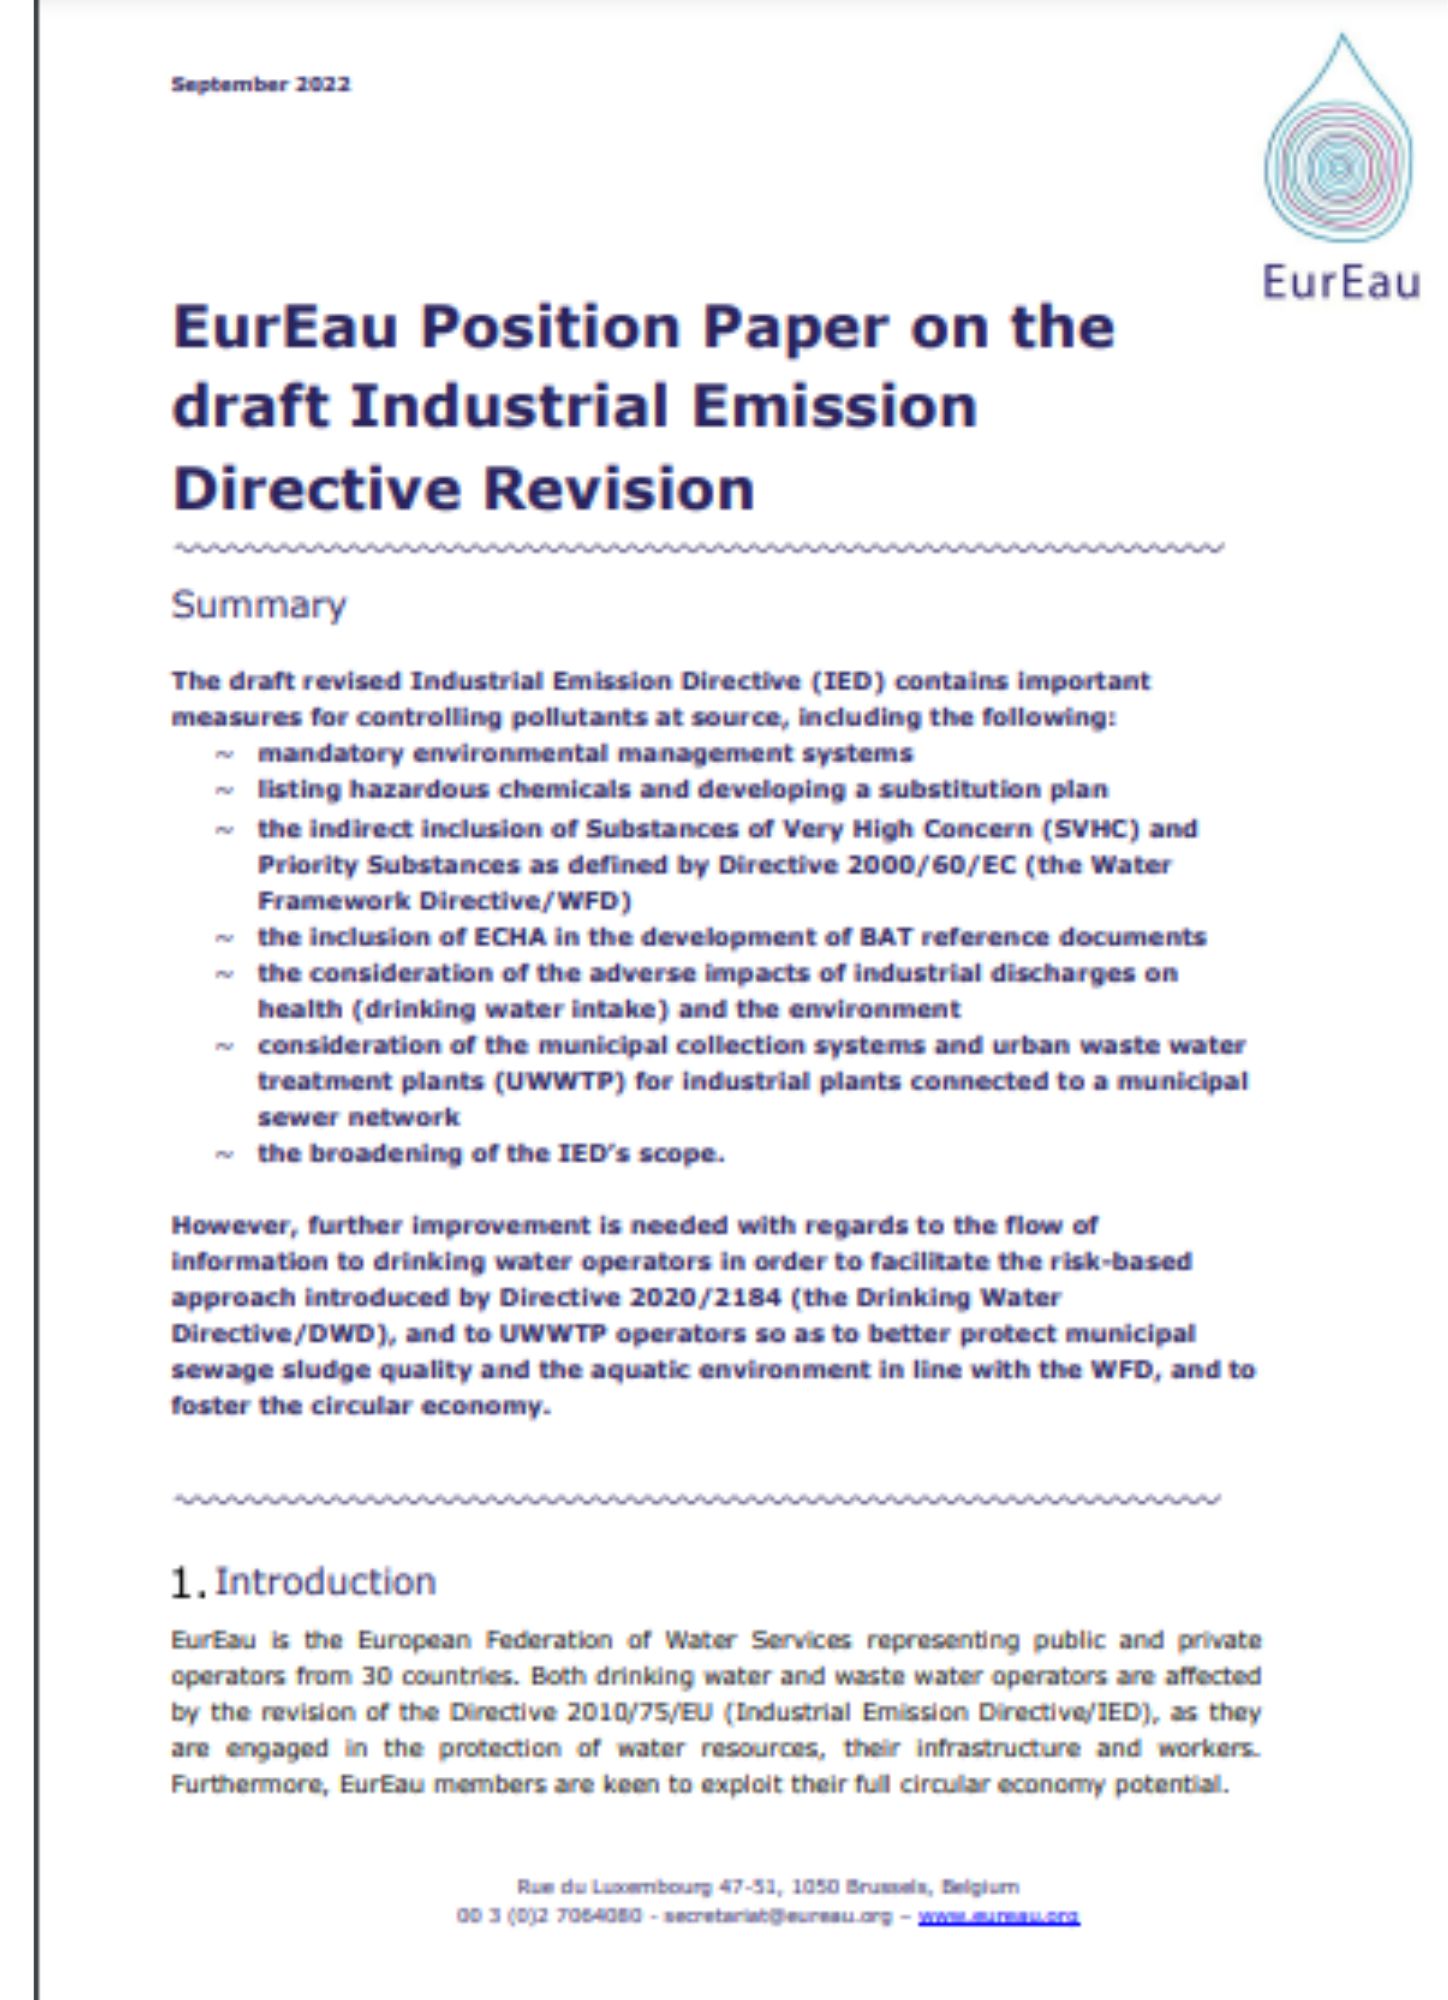 Position Paper on the Industrial Emission Directive